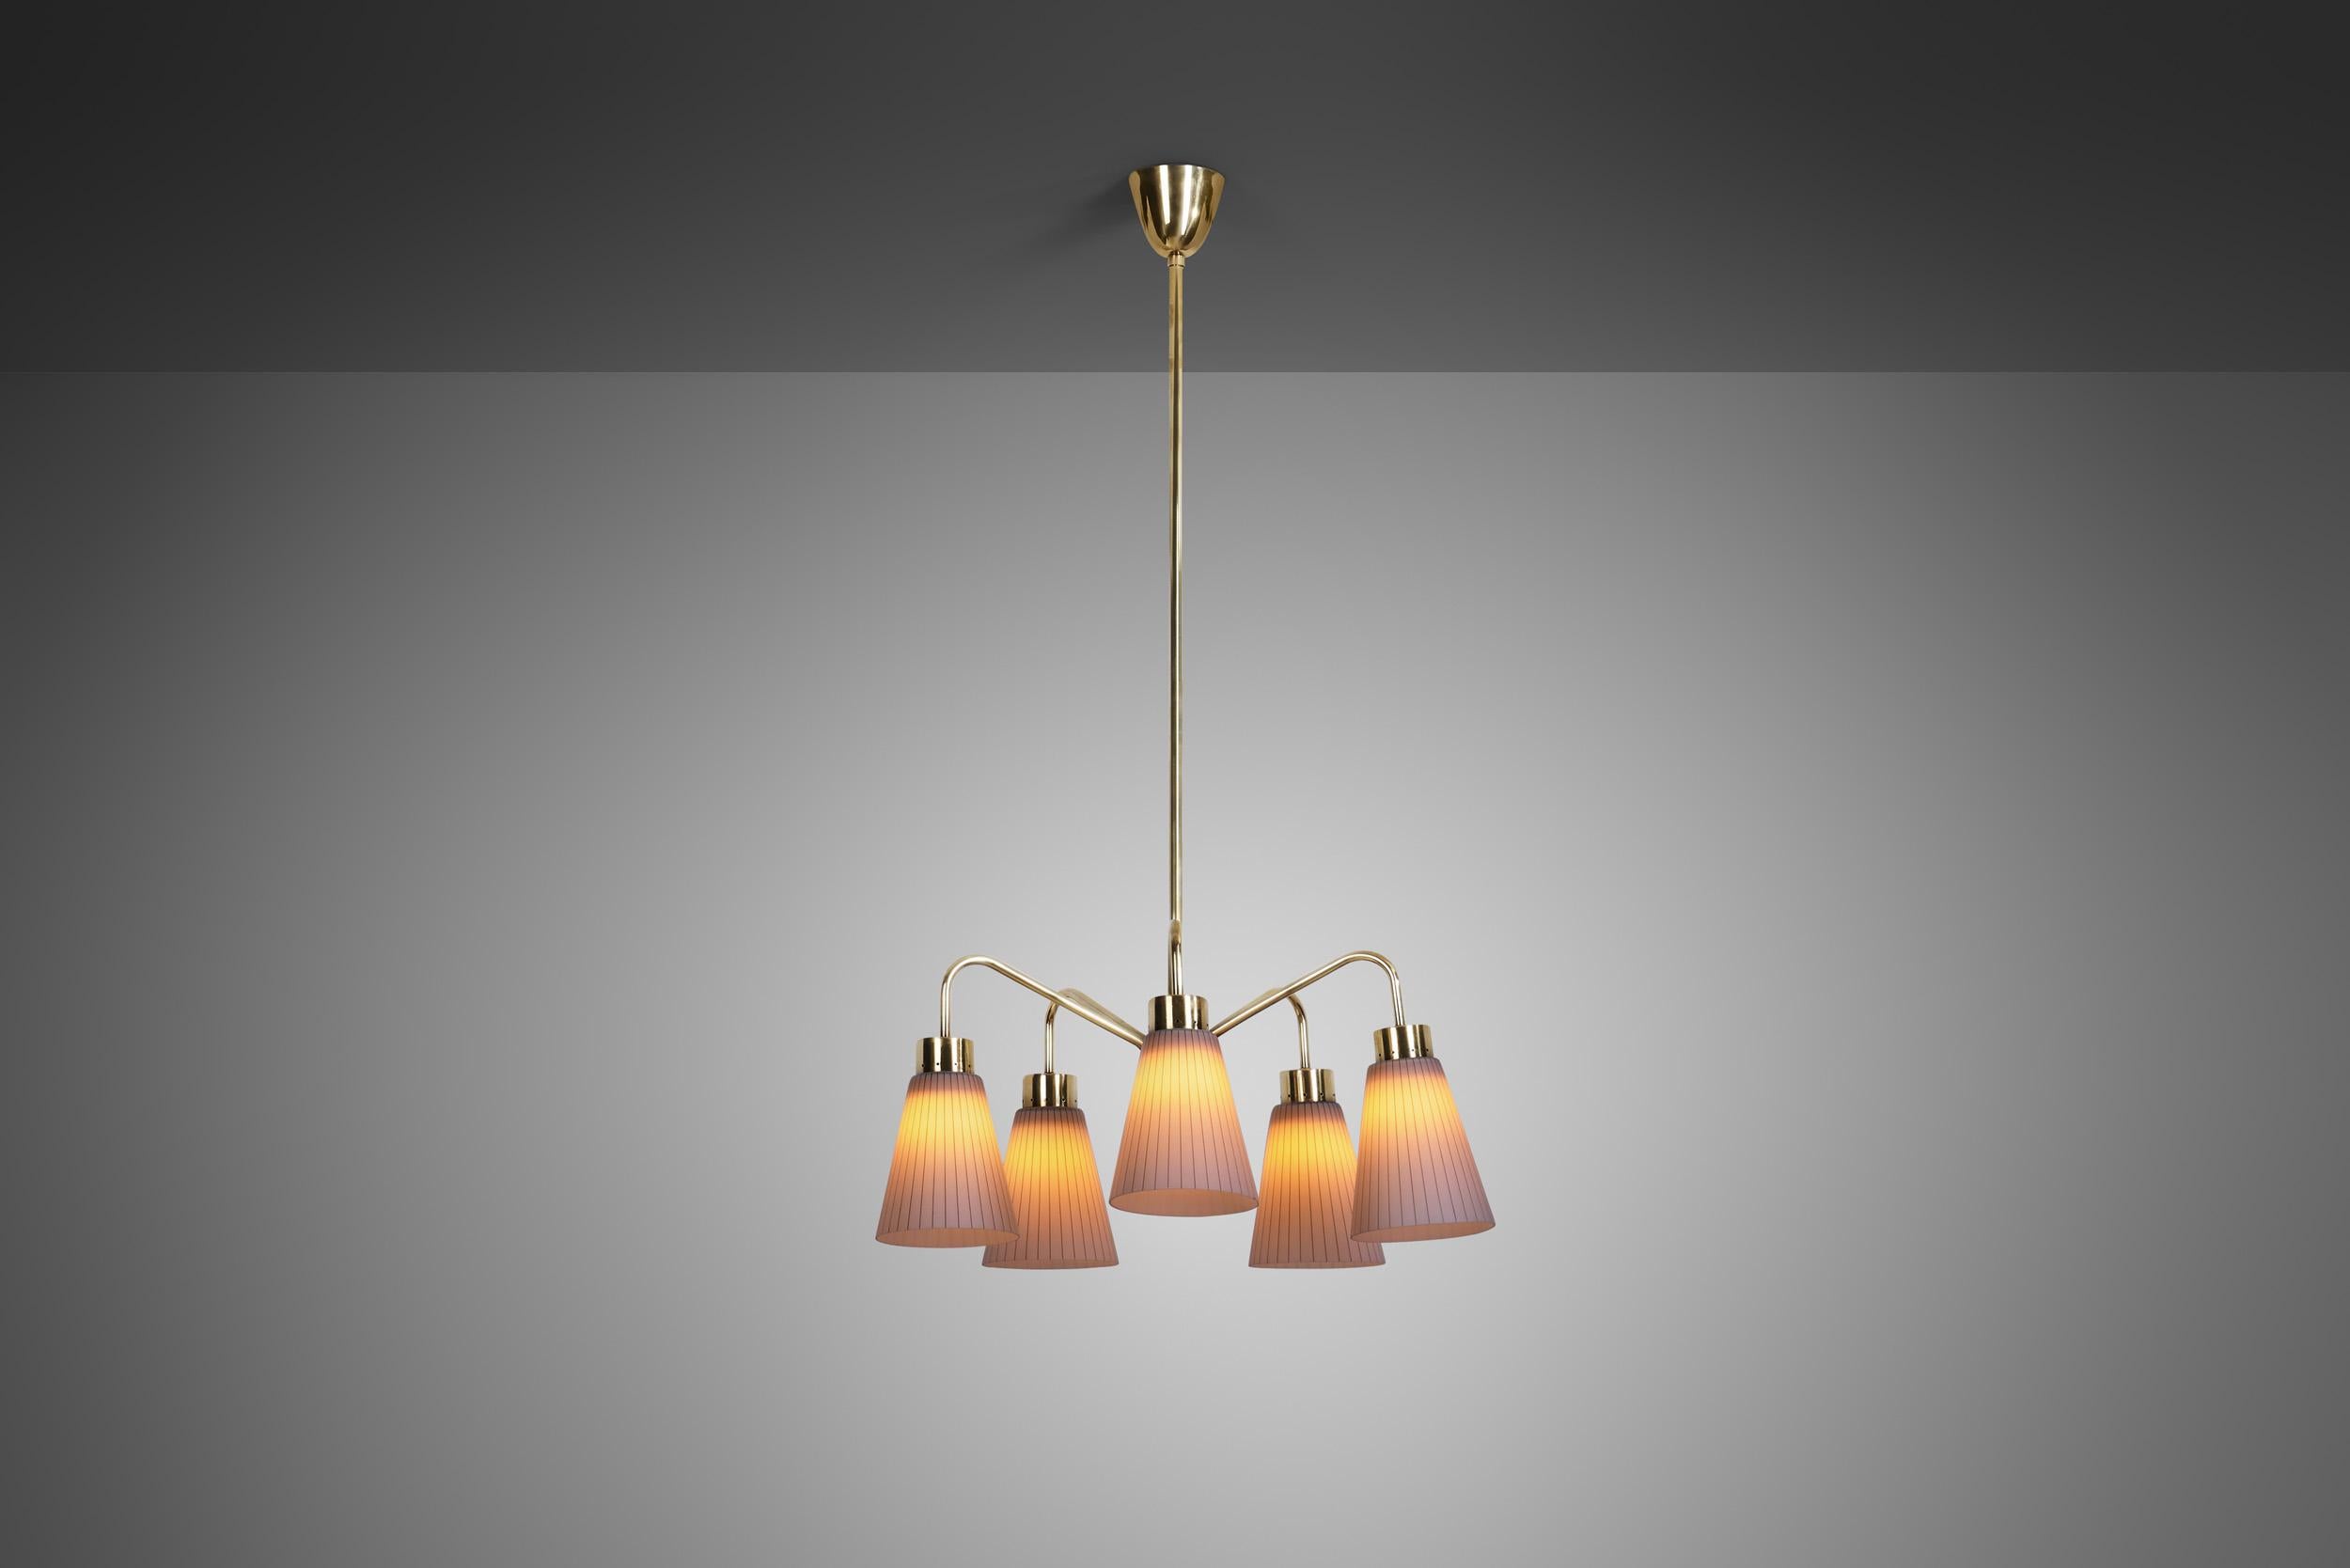 This brass and glass chandelier is full of personality, with unexpected details that make it unique. Most likely a one-off, this model has an essentially mid-century modern look with lovely accents and impeccable craftsmanship.

There are a number